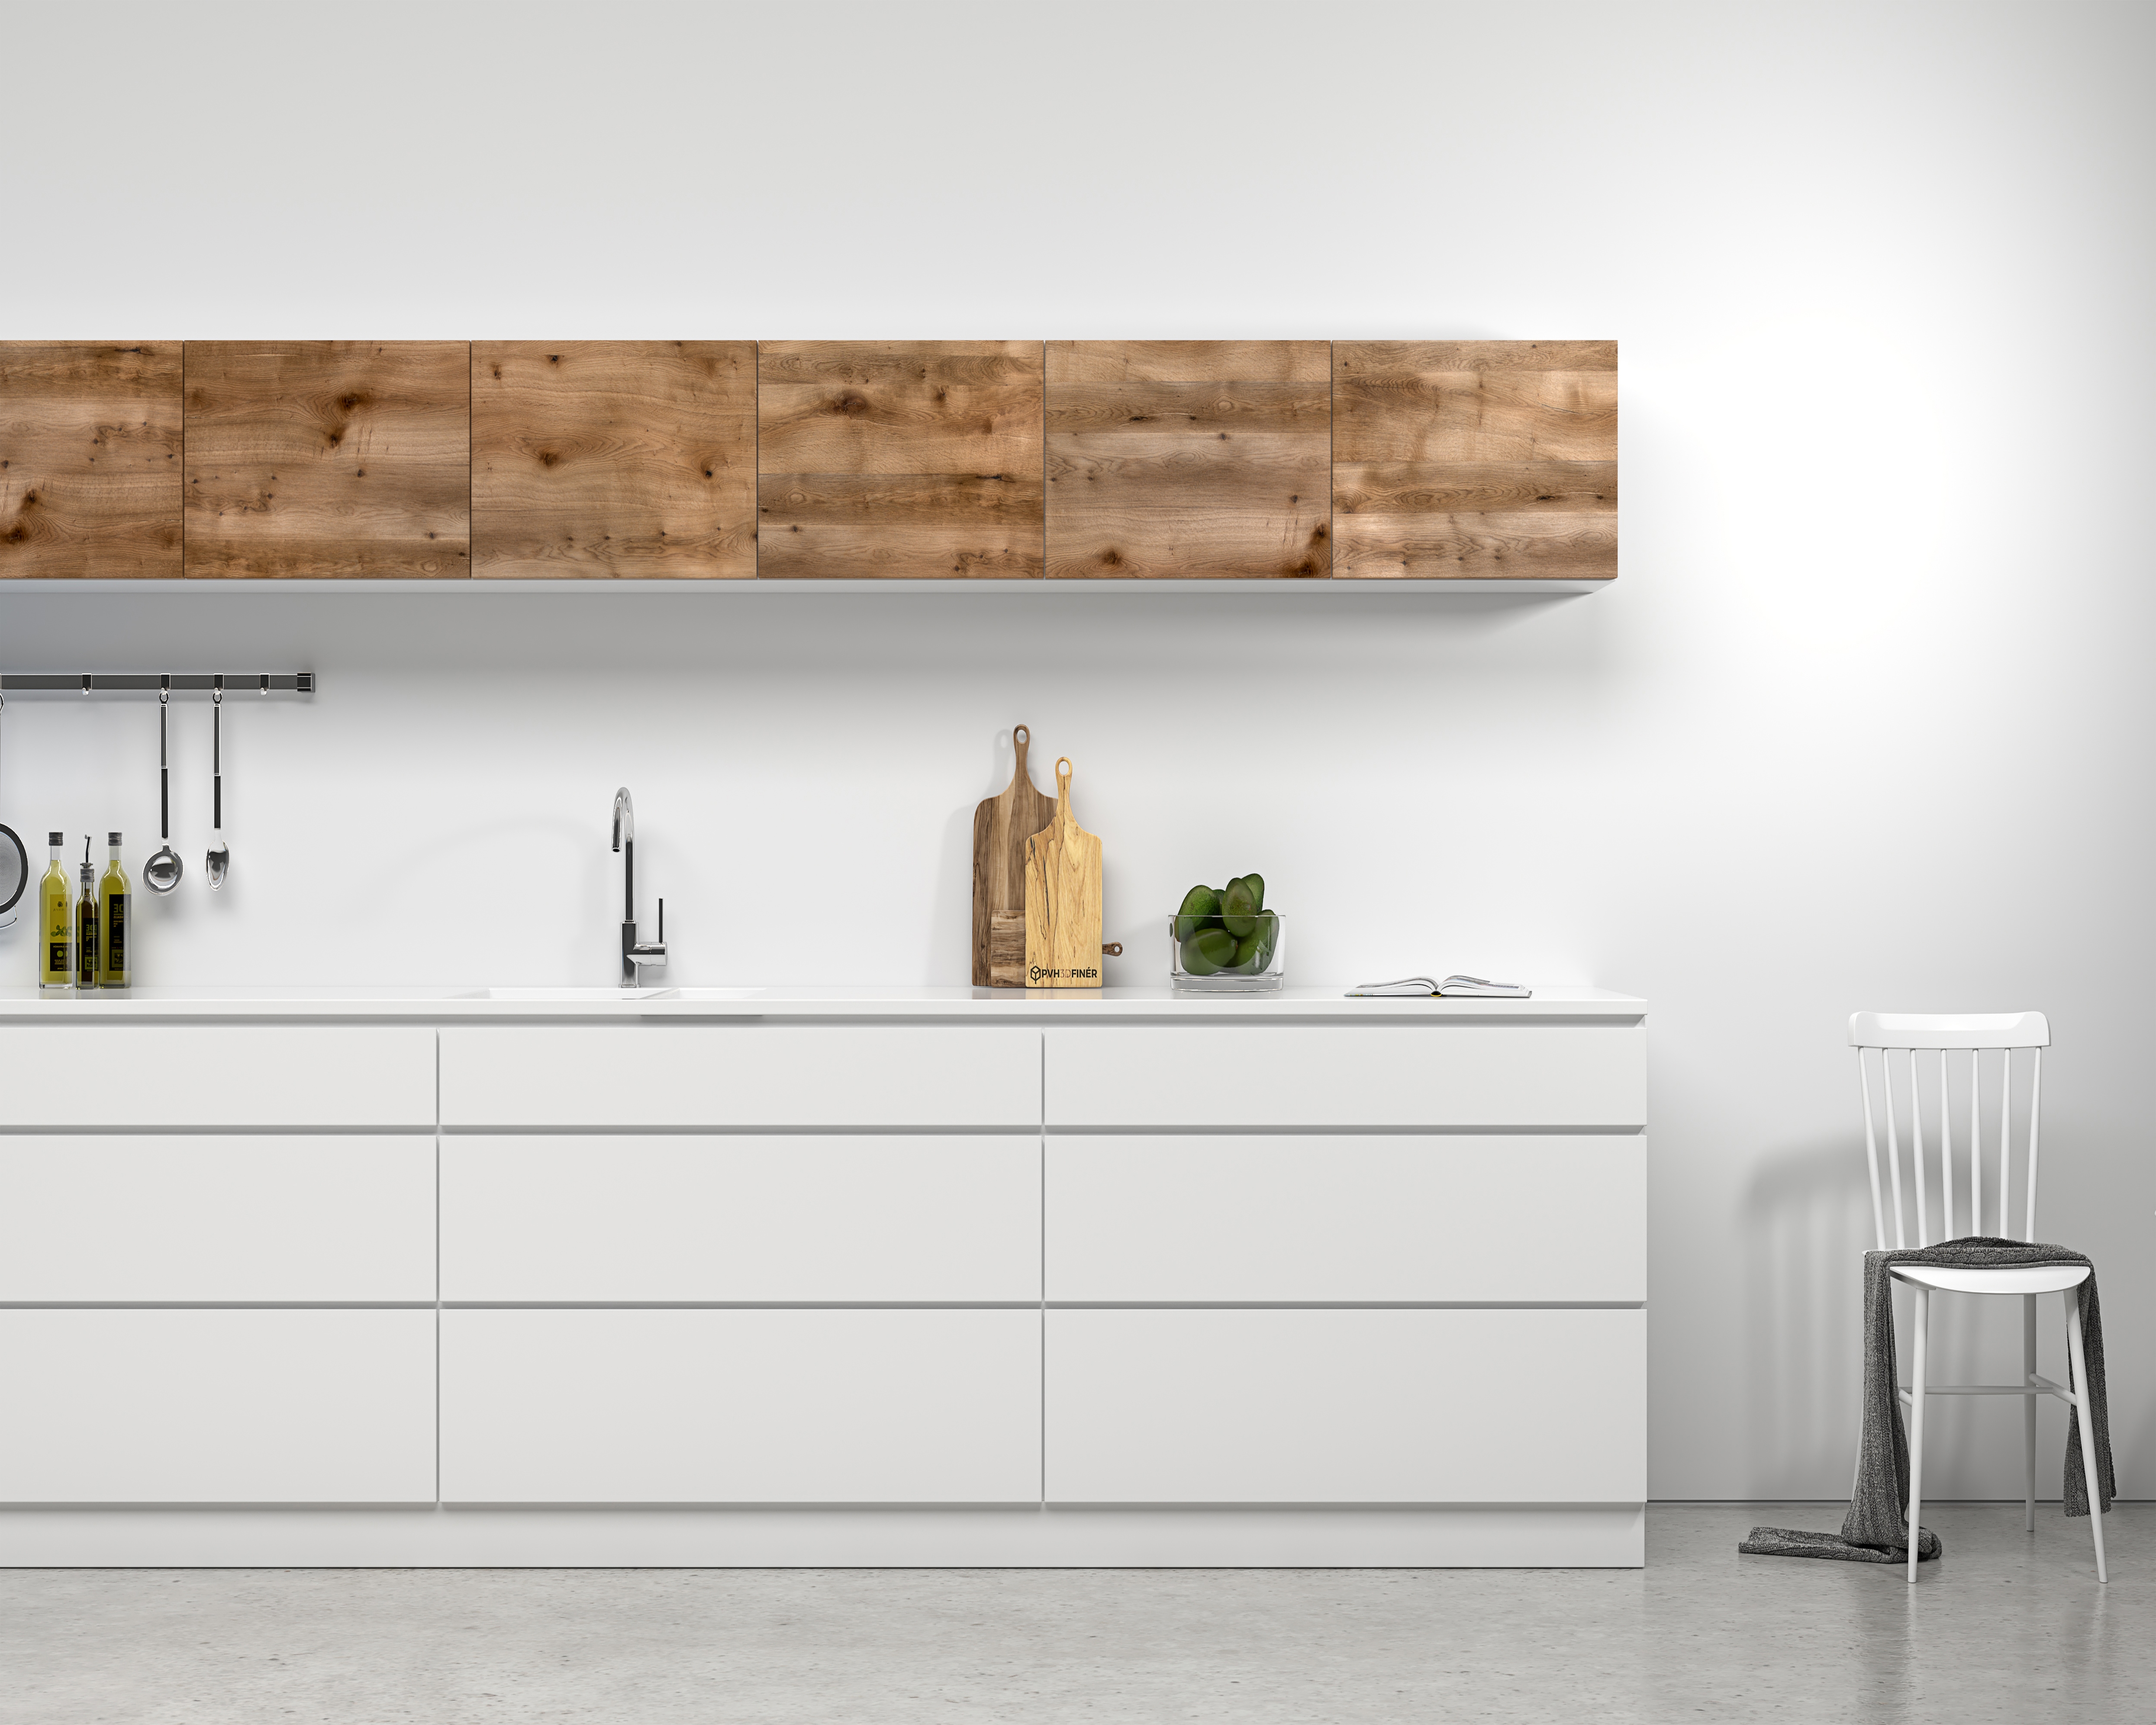 Barnwood - Brown Oak used as kitchen fronts which creates a beautiful contrast to the modern white